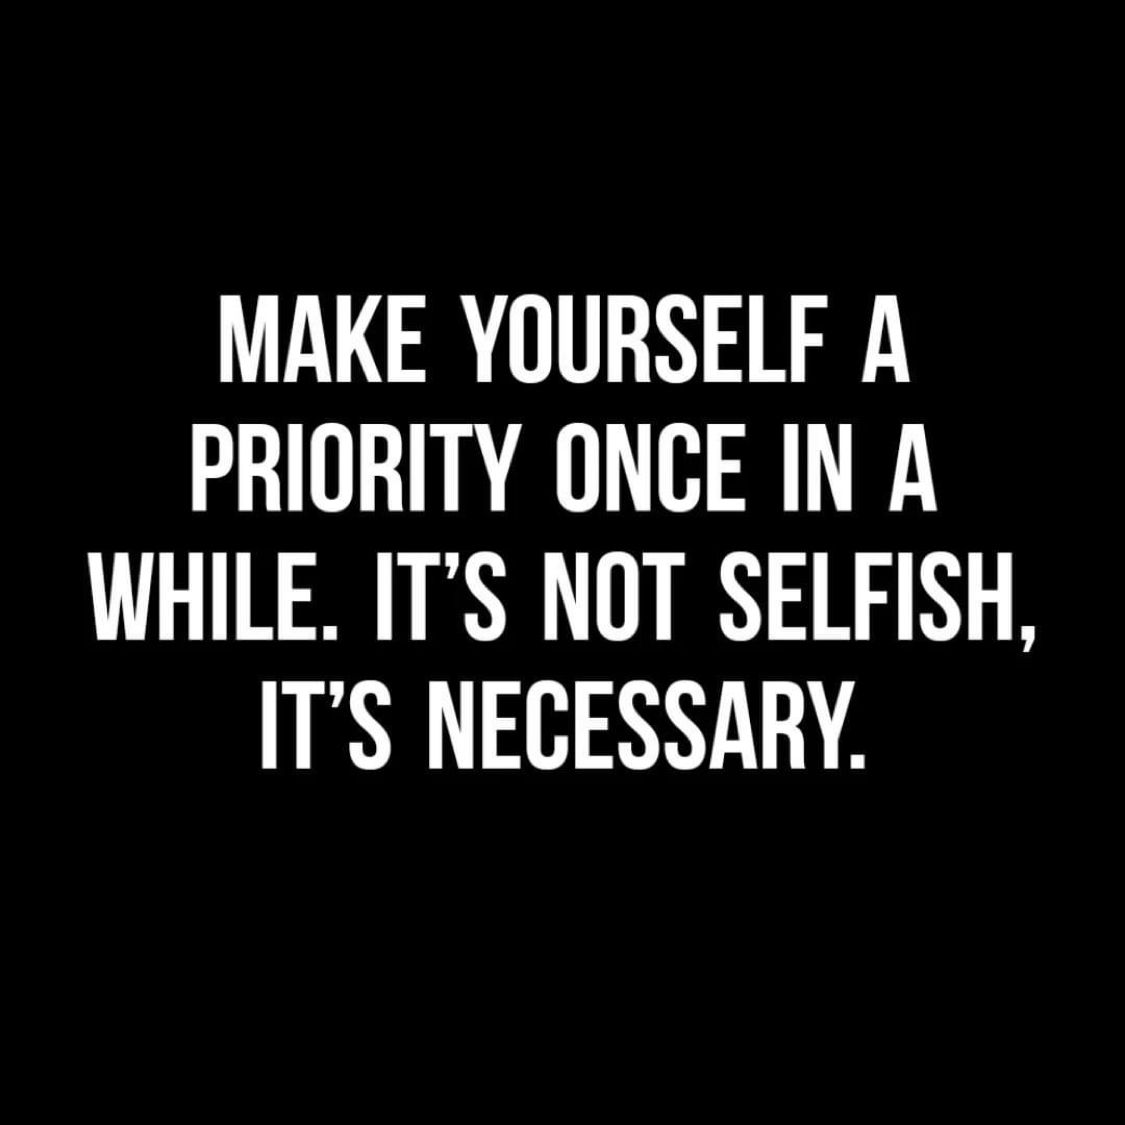 Katherine Byerly, MPA on LinkedIn: Self-care is not selfish. You can’t ...